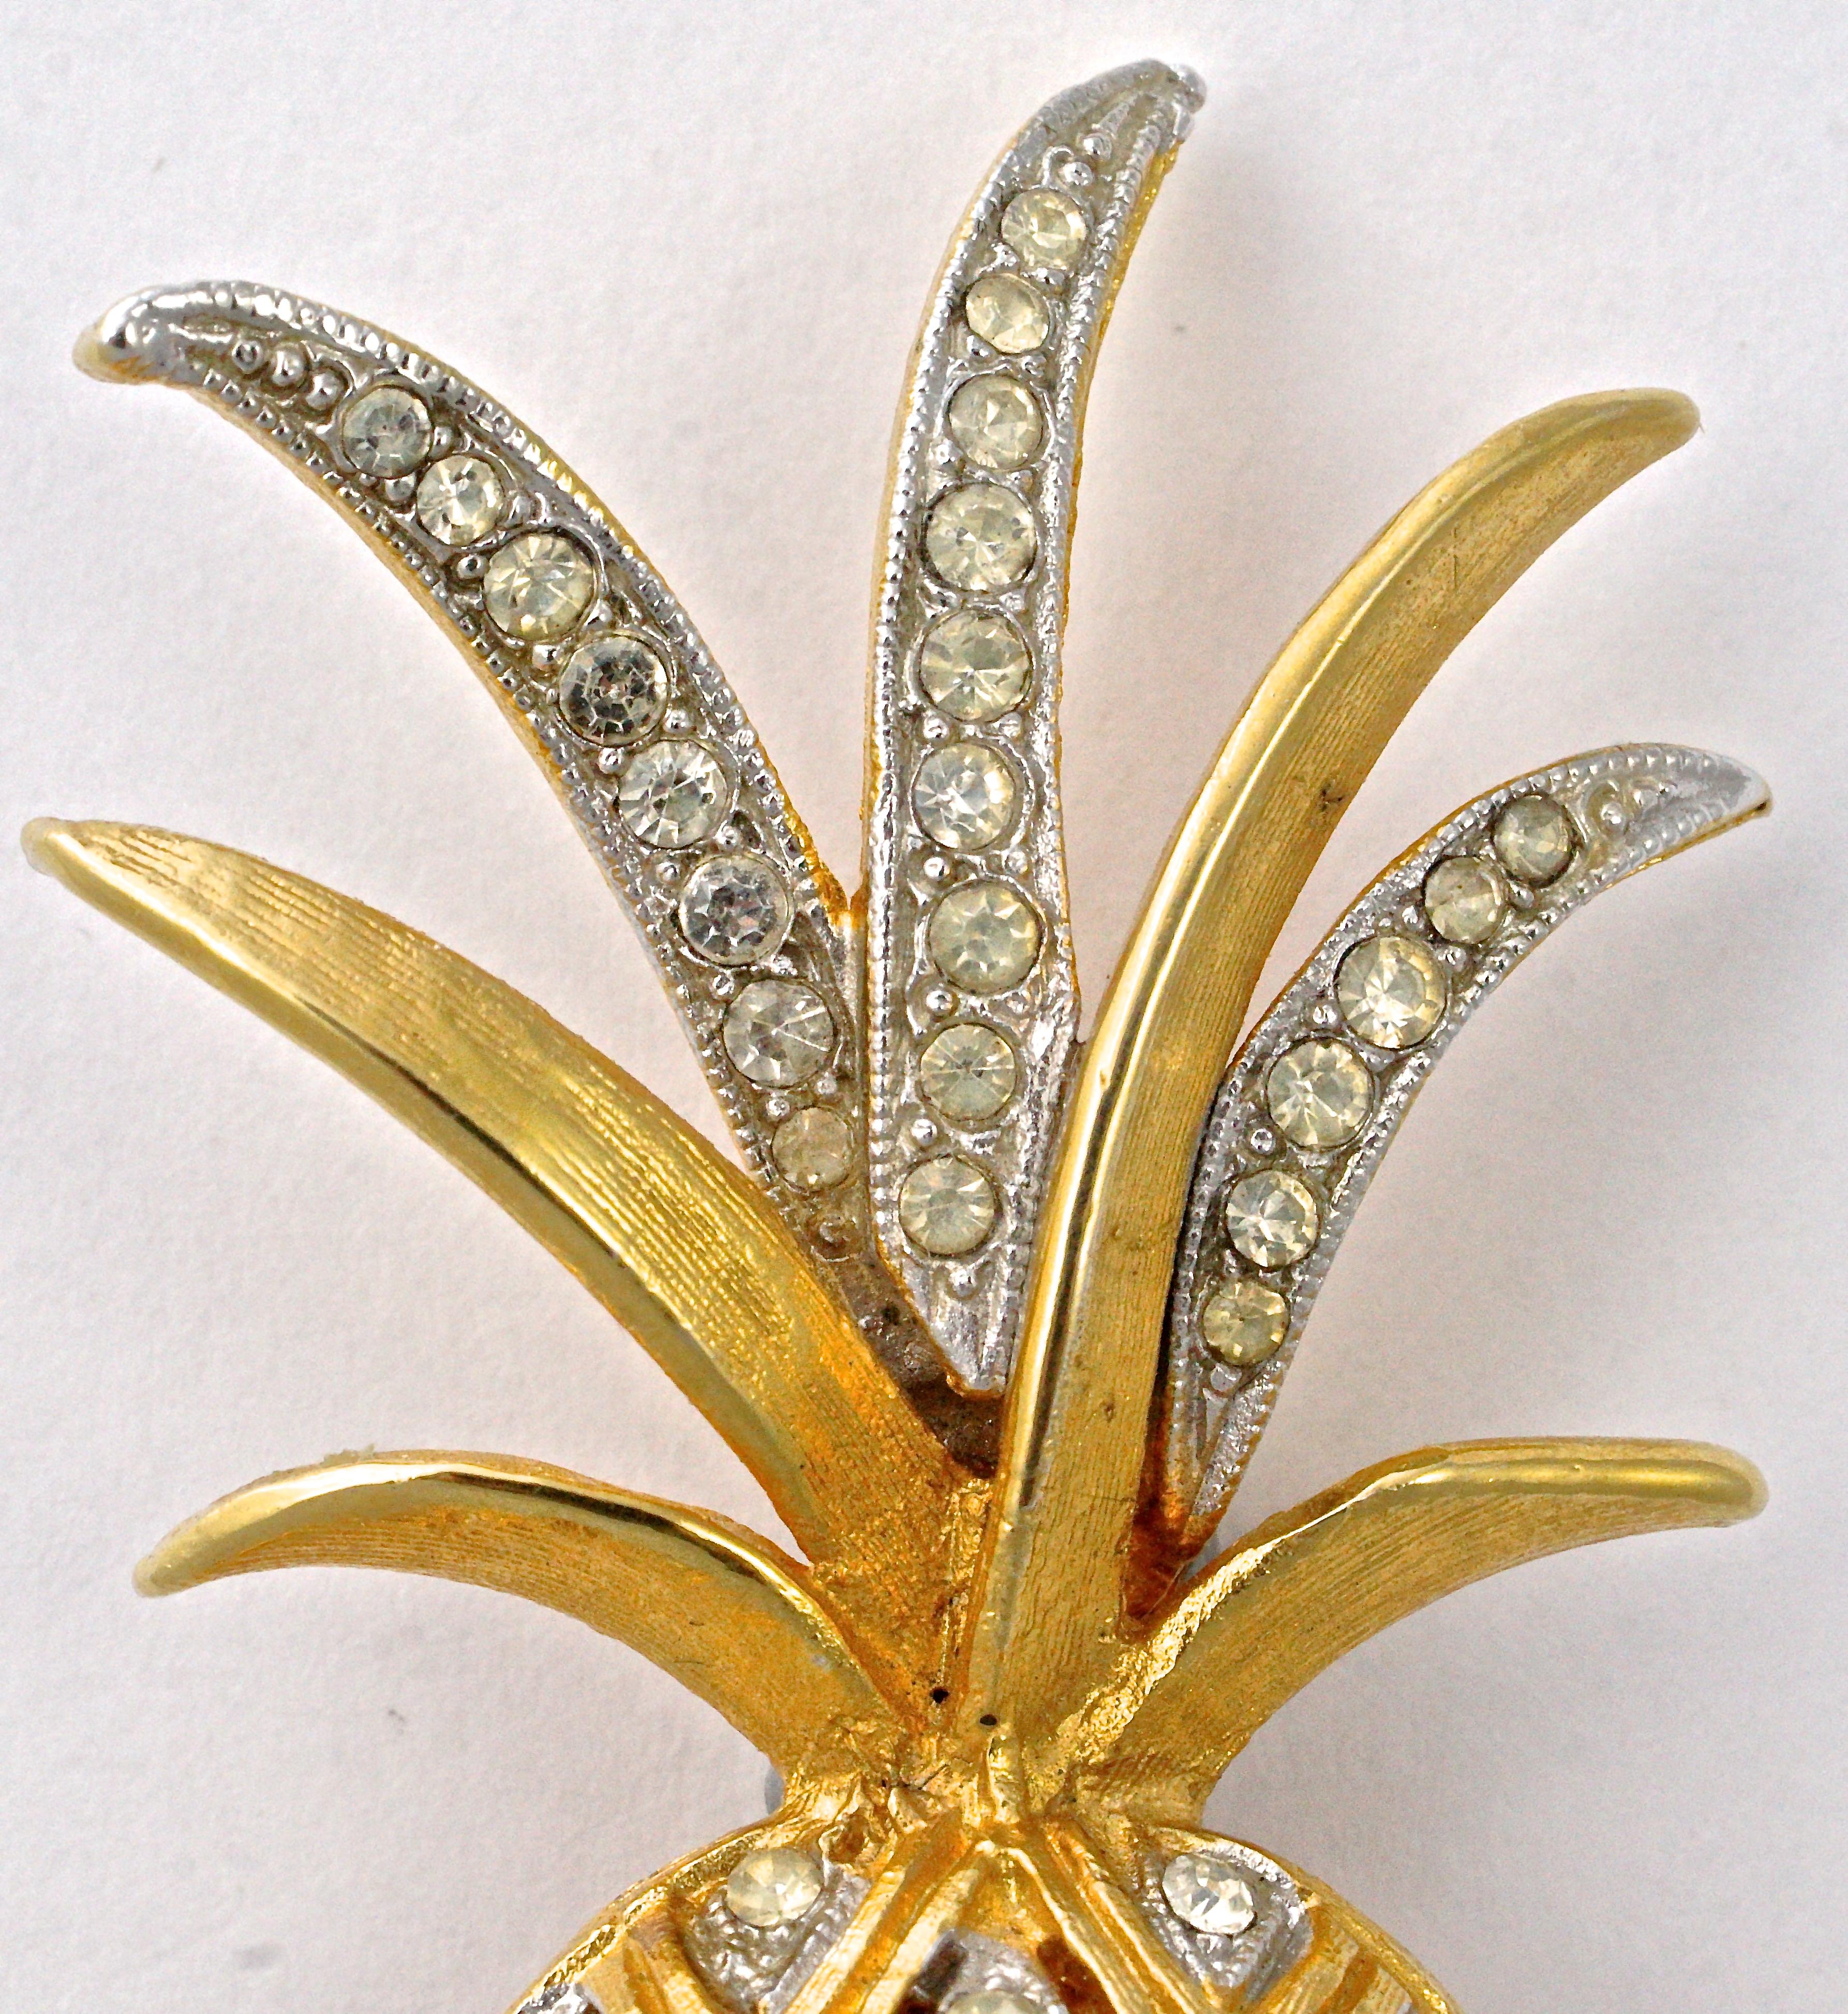 Vendome fabulous gold plated pineapple brooch, embellished with clear faceted rhinestones set in silver tone with a milgrain decorative edging. Measuring length 7.85cm / 3.09 inches by width 3.3cm / 1.3 inches. The brooch is in very good condition.